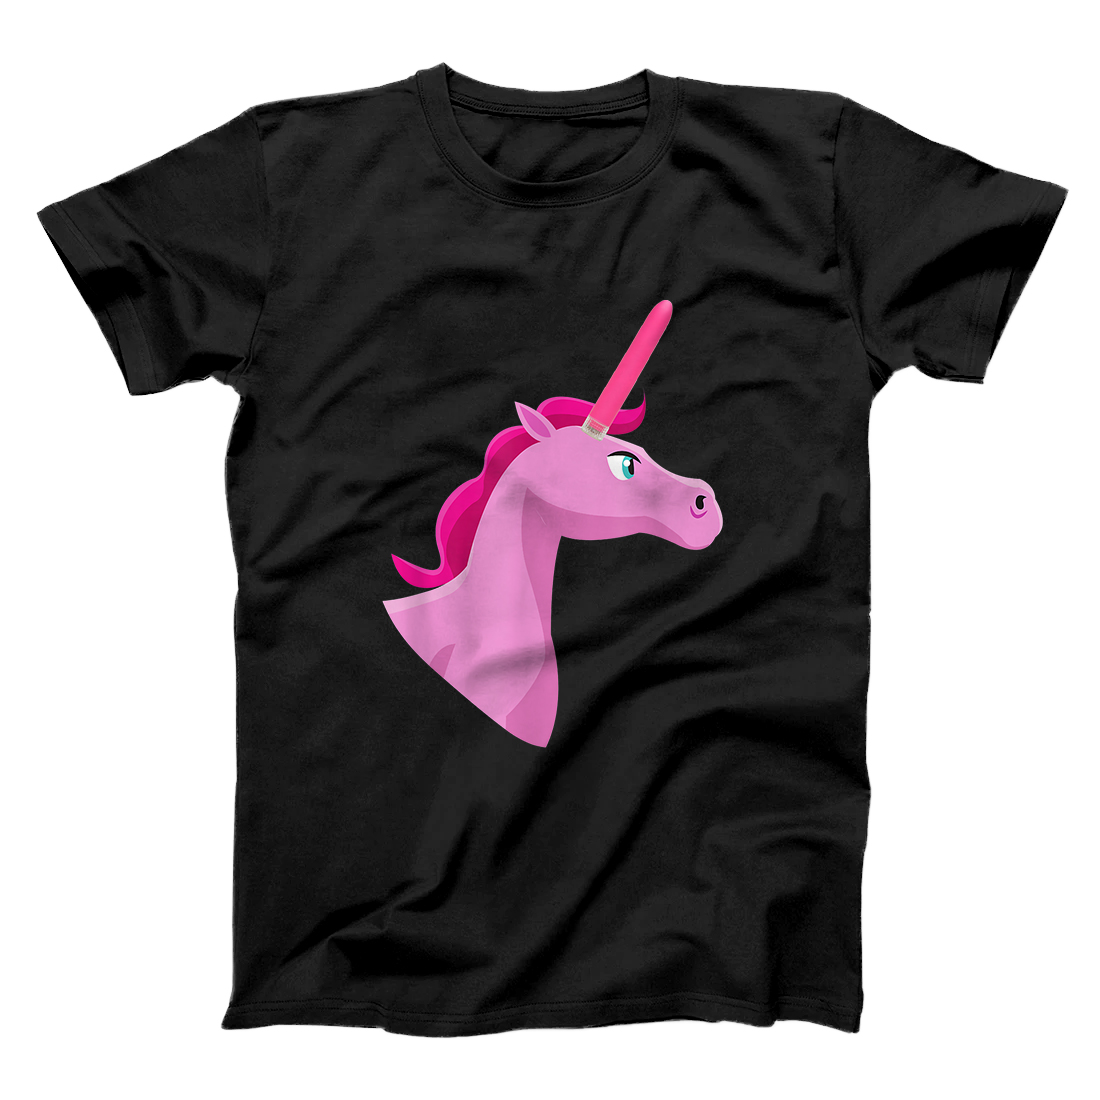 Personalized Unicorn with a vibrator for a horn T-Shirt